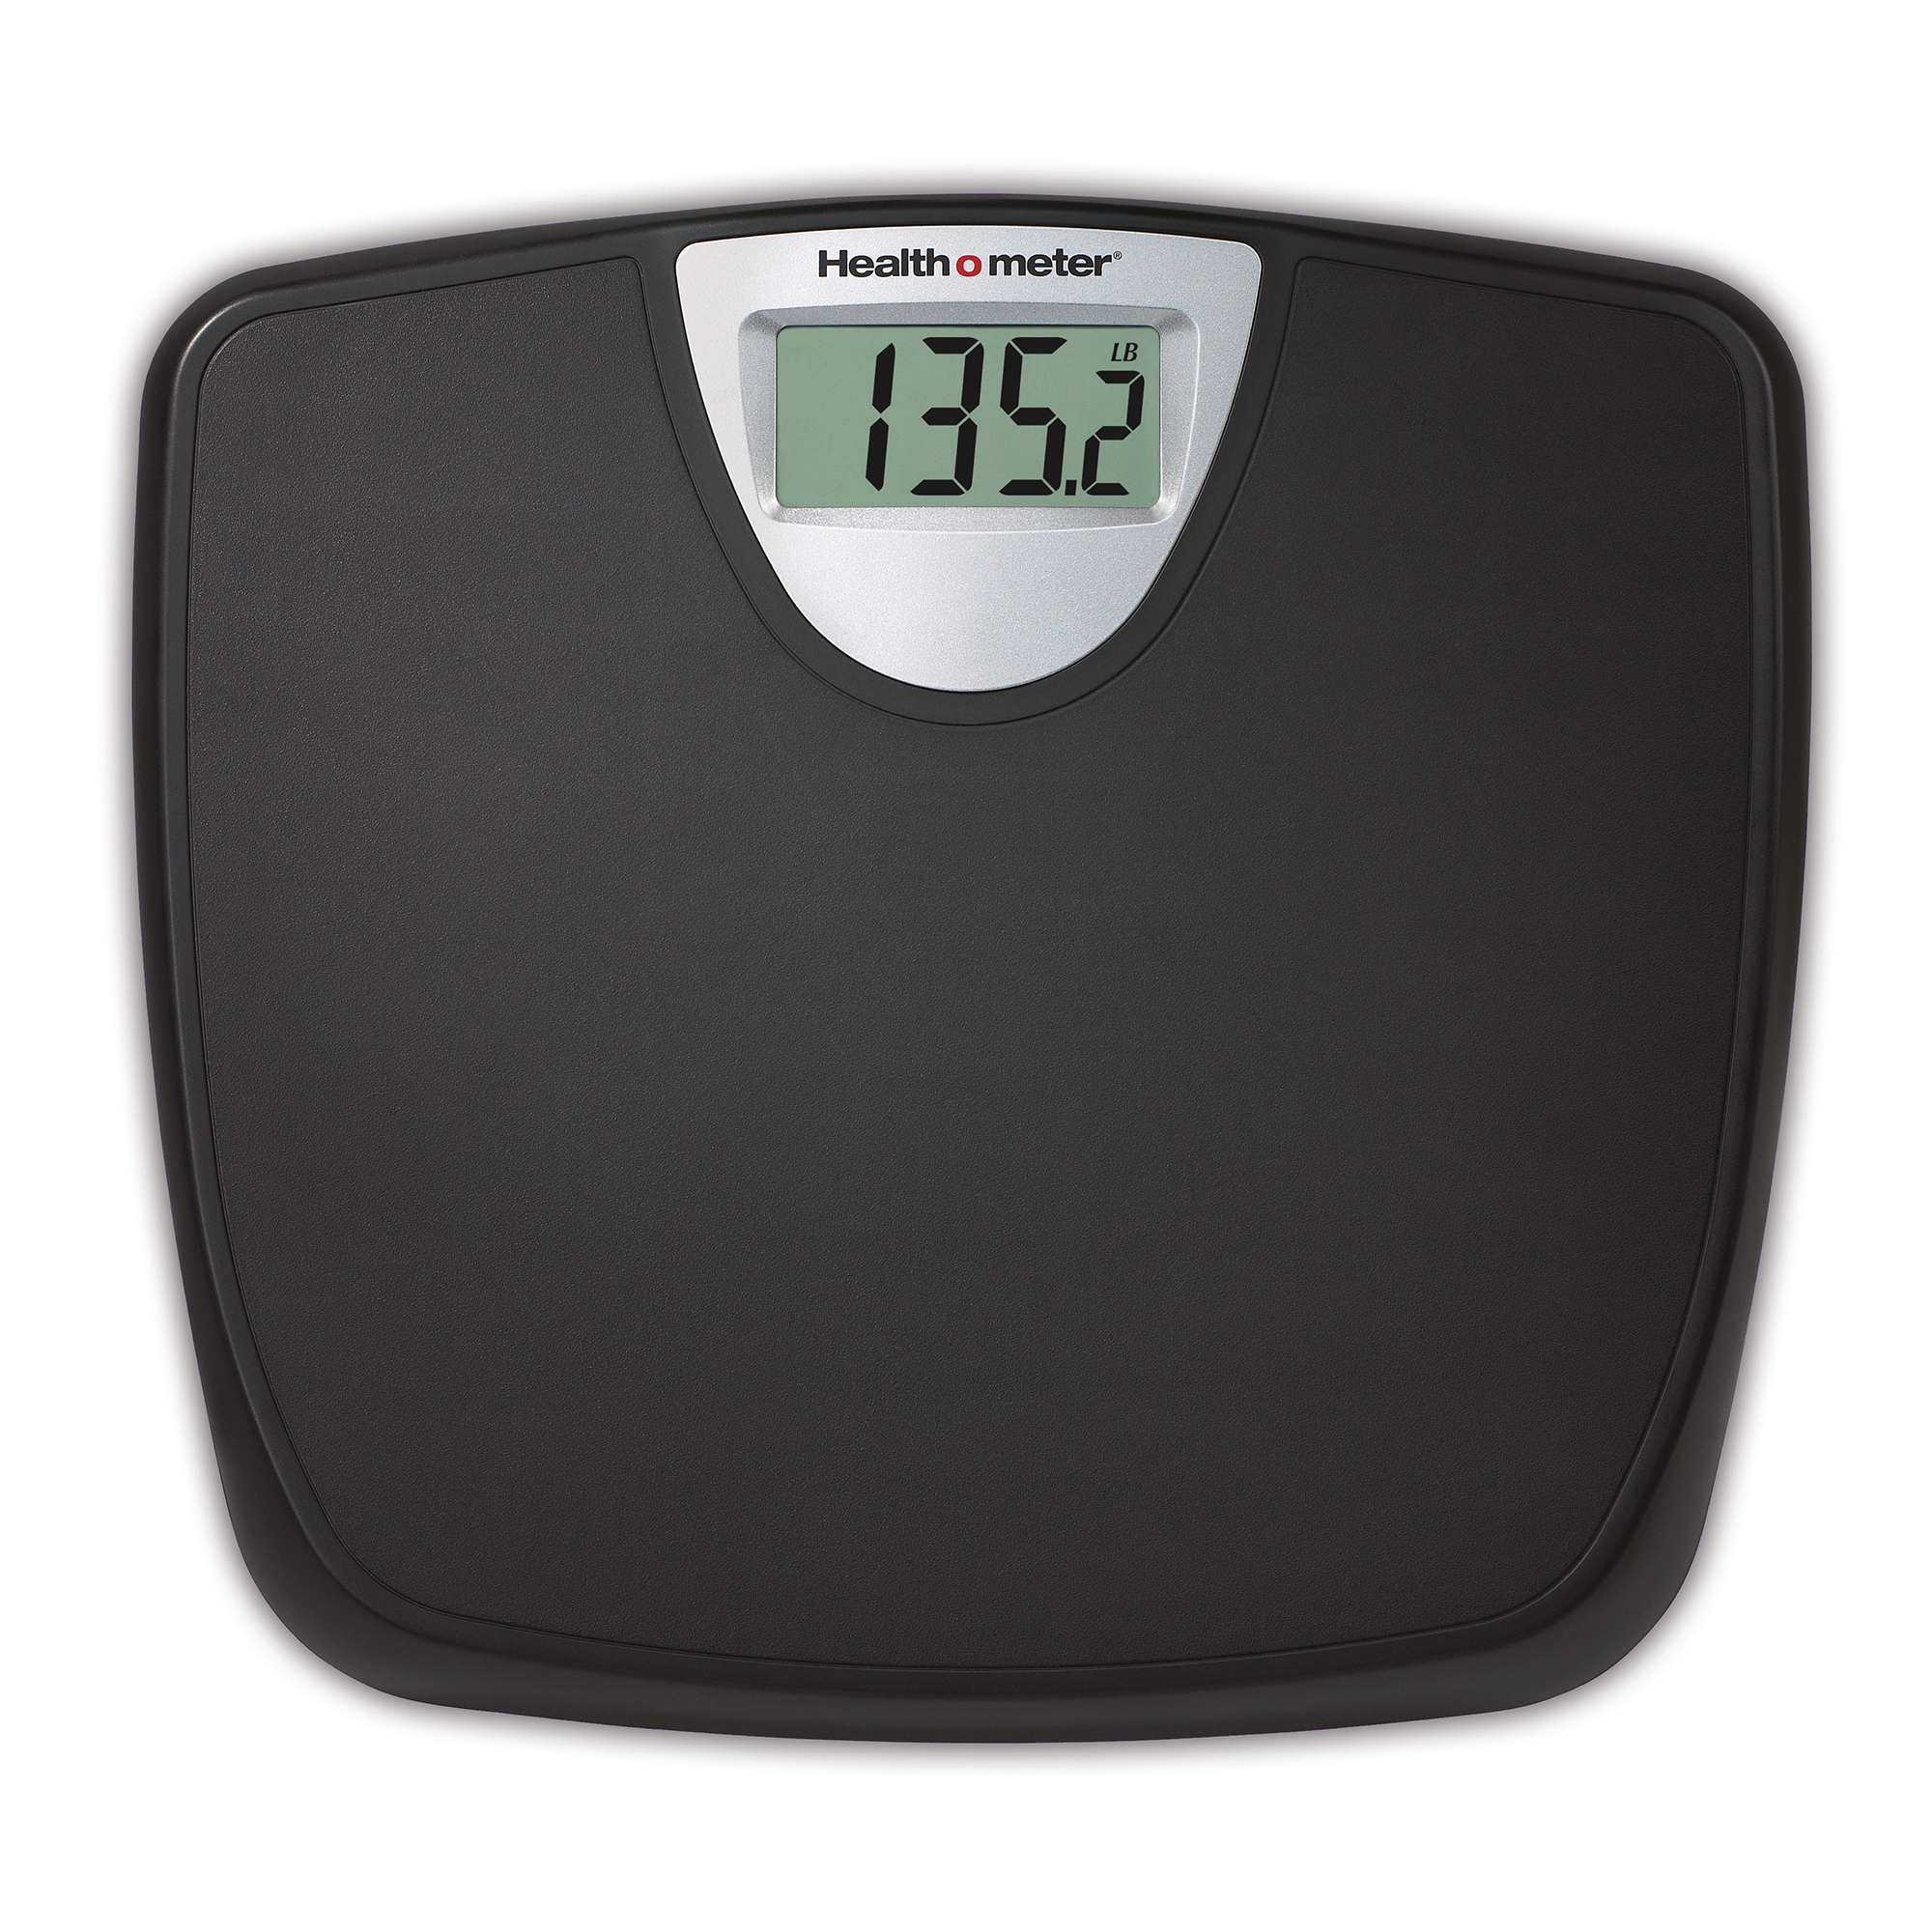 Health O Meter Scale | Weight Tracking Digital Bathroom Scale, Black - image 1 of 10